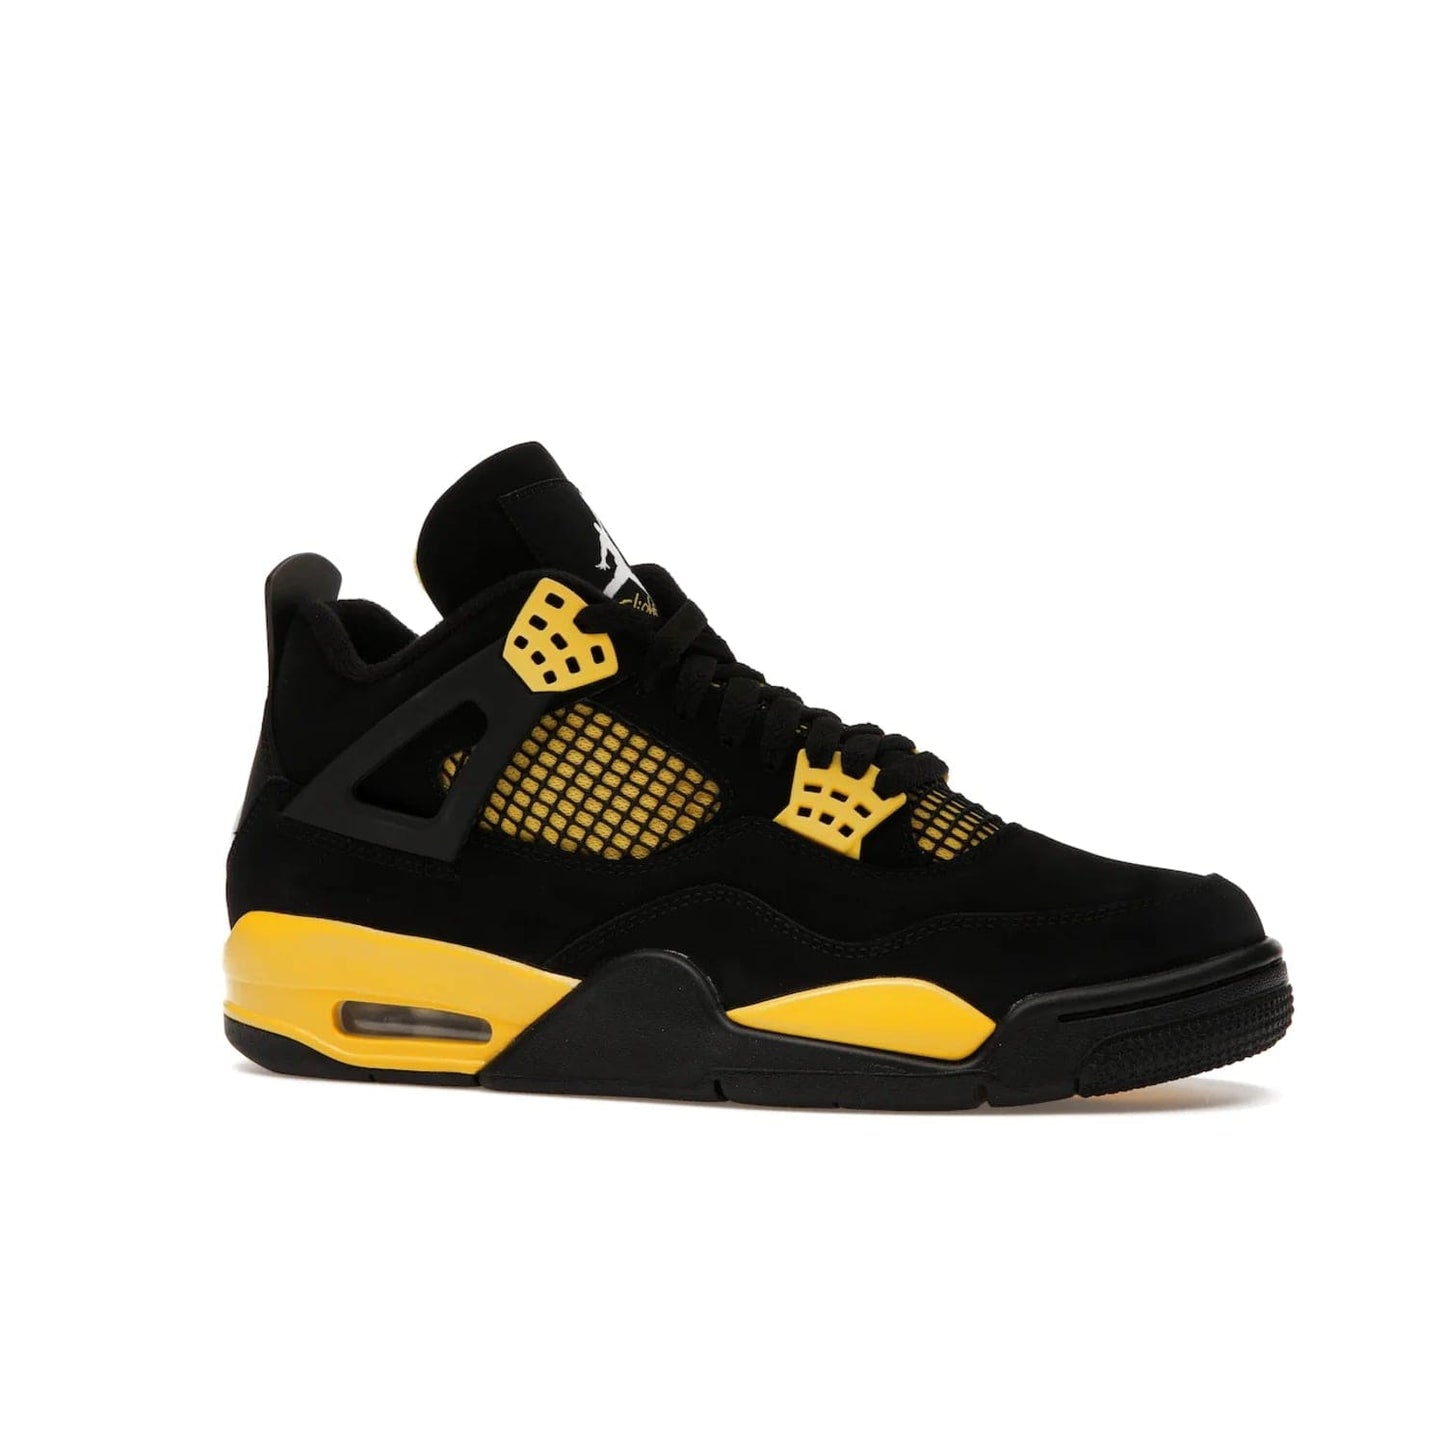 Jordan 4 Retro Thunder (2023) - Image 3 - Only at www.BallersClubKickz.com - Iconic Air Jordan 4 Retro Thunder (2023) returns with black nubuck upper and Tour Yellow details. Featuring Jumpman logo on heel tab, tongue and insoles. Dropping May 13th, 2023.